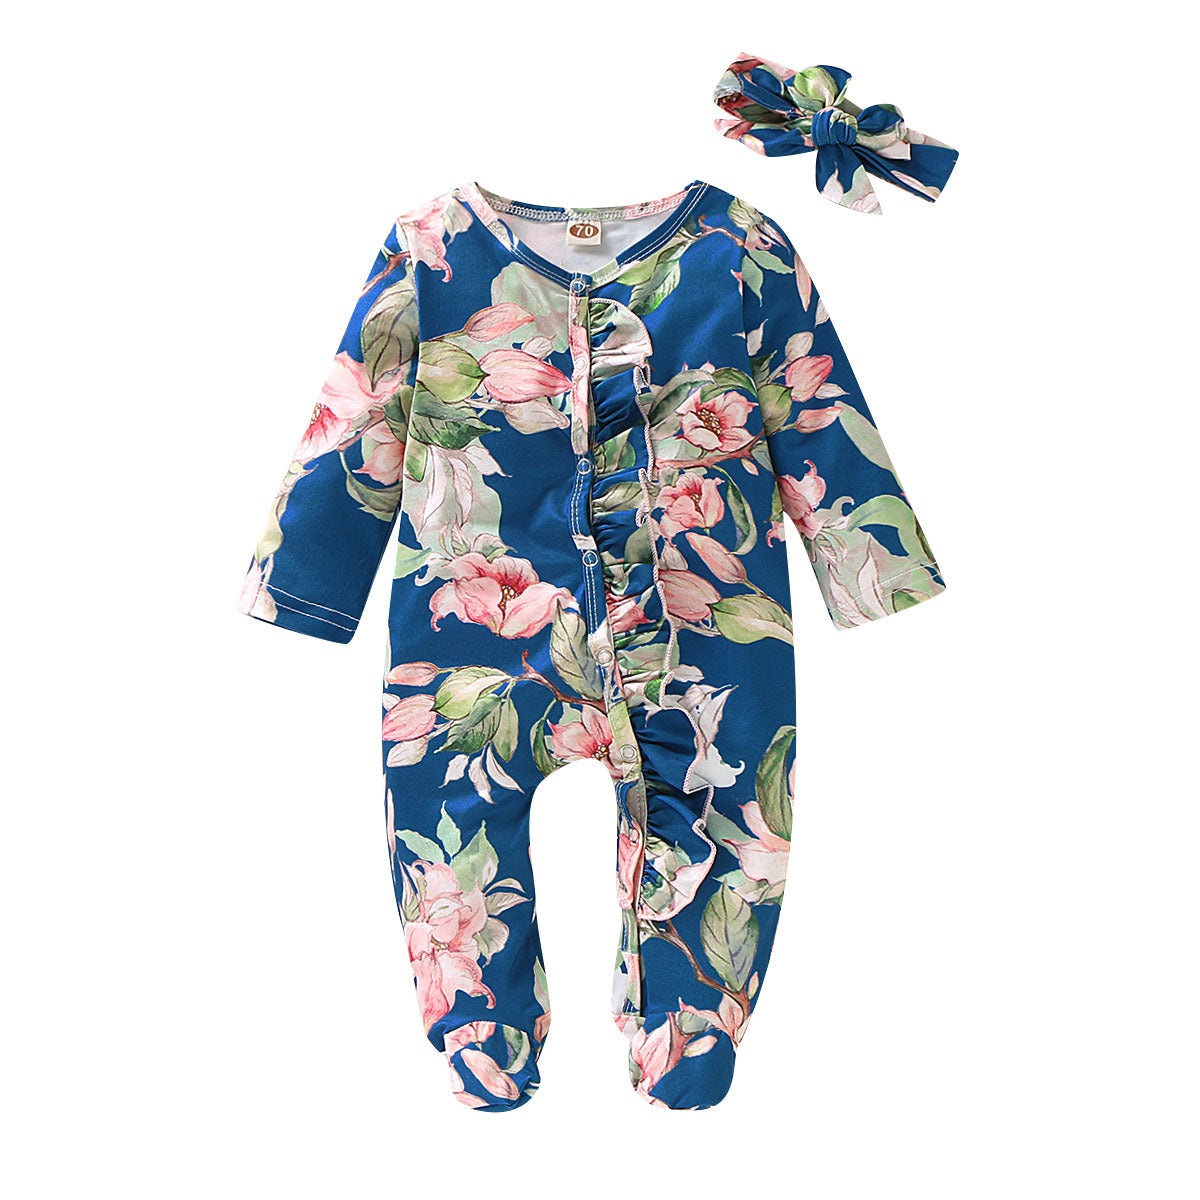 Baby children's romper new style pajamas with turban